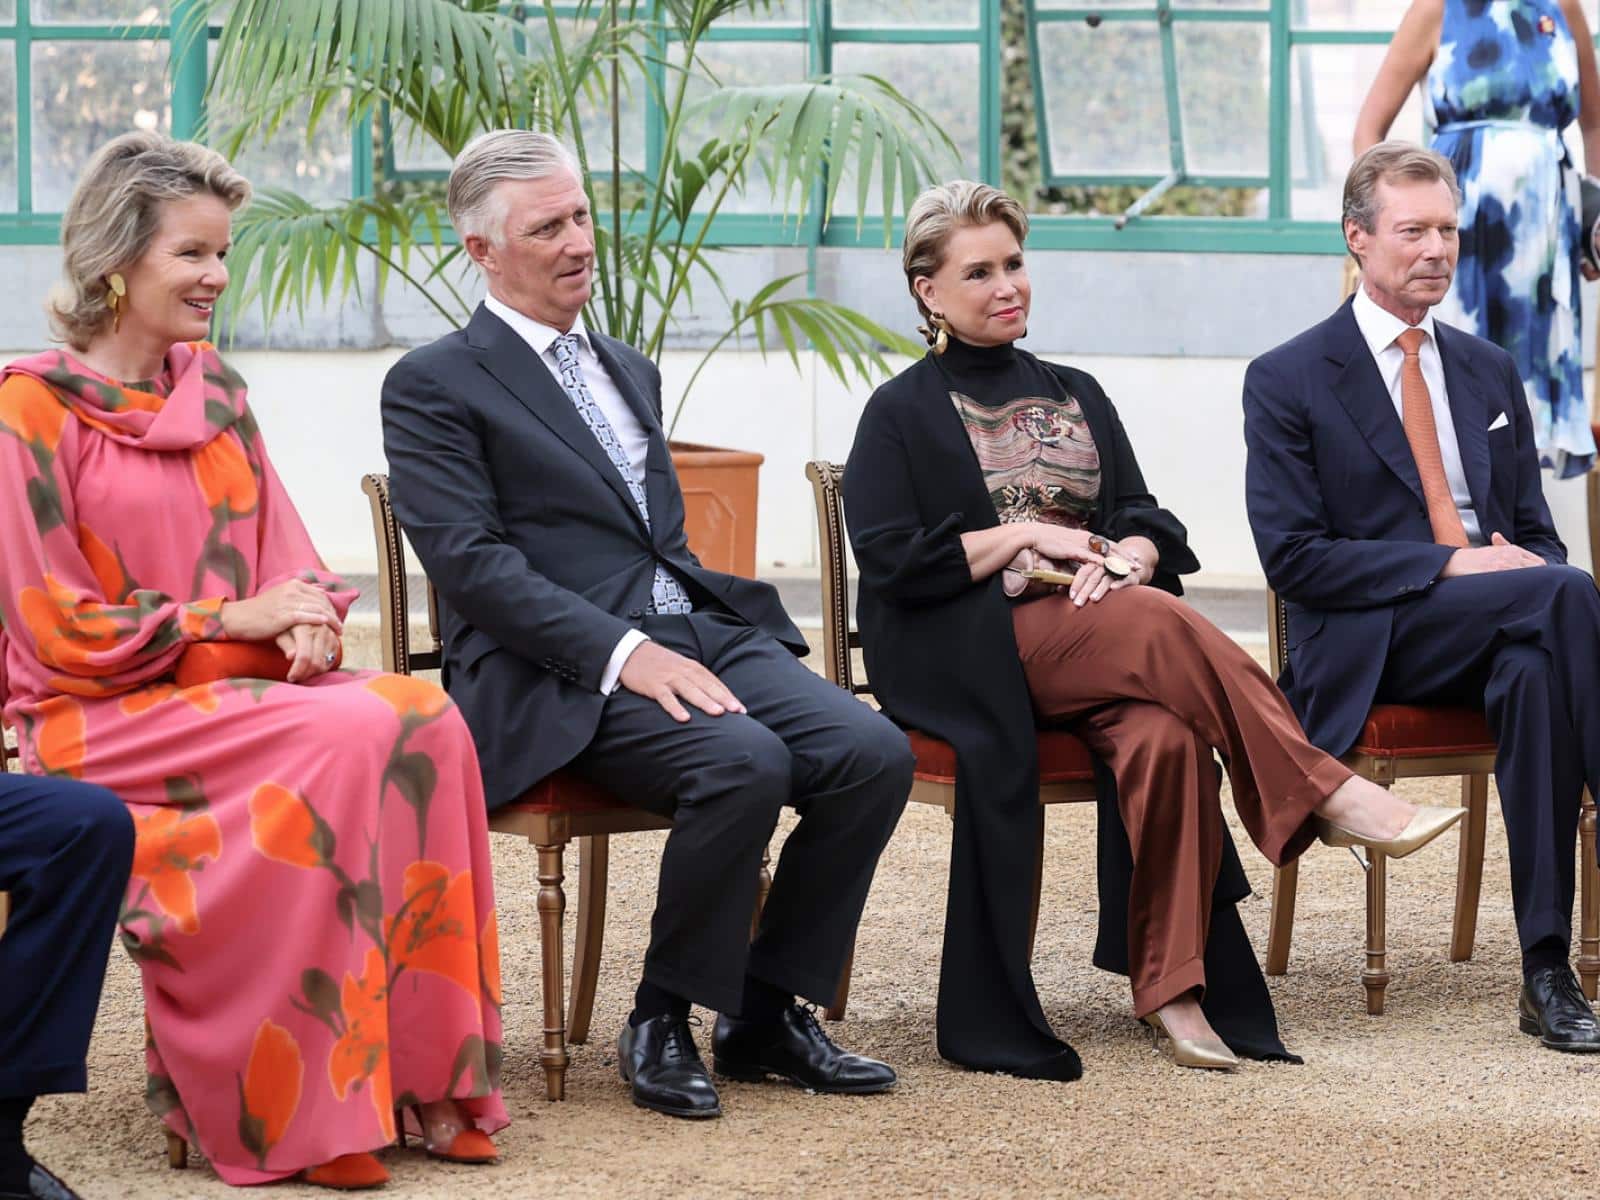 Queen Mathilde’s Fashion Month: A Look at Her Stylish Outfits